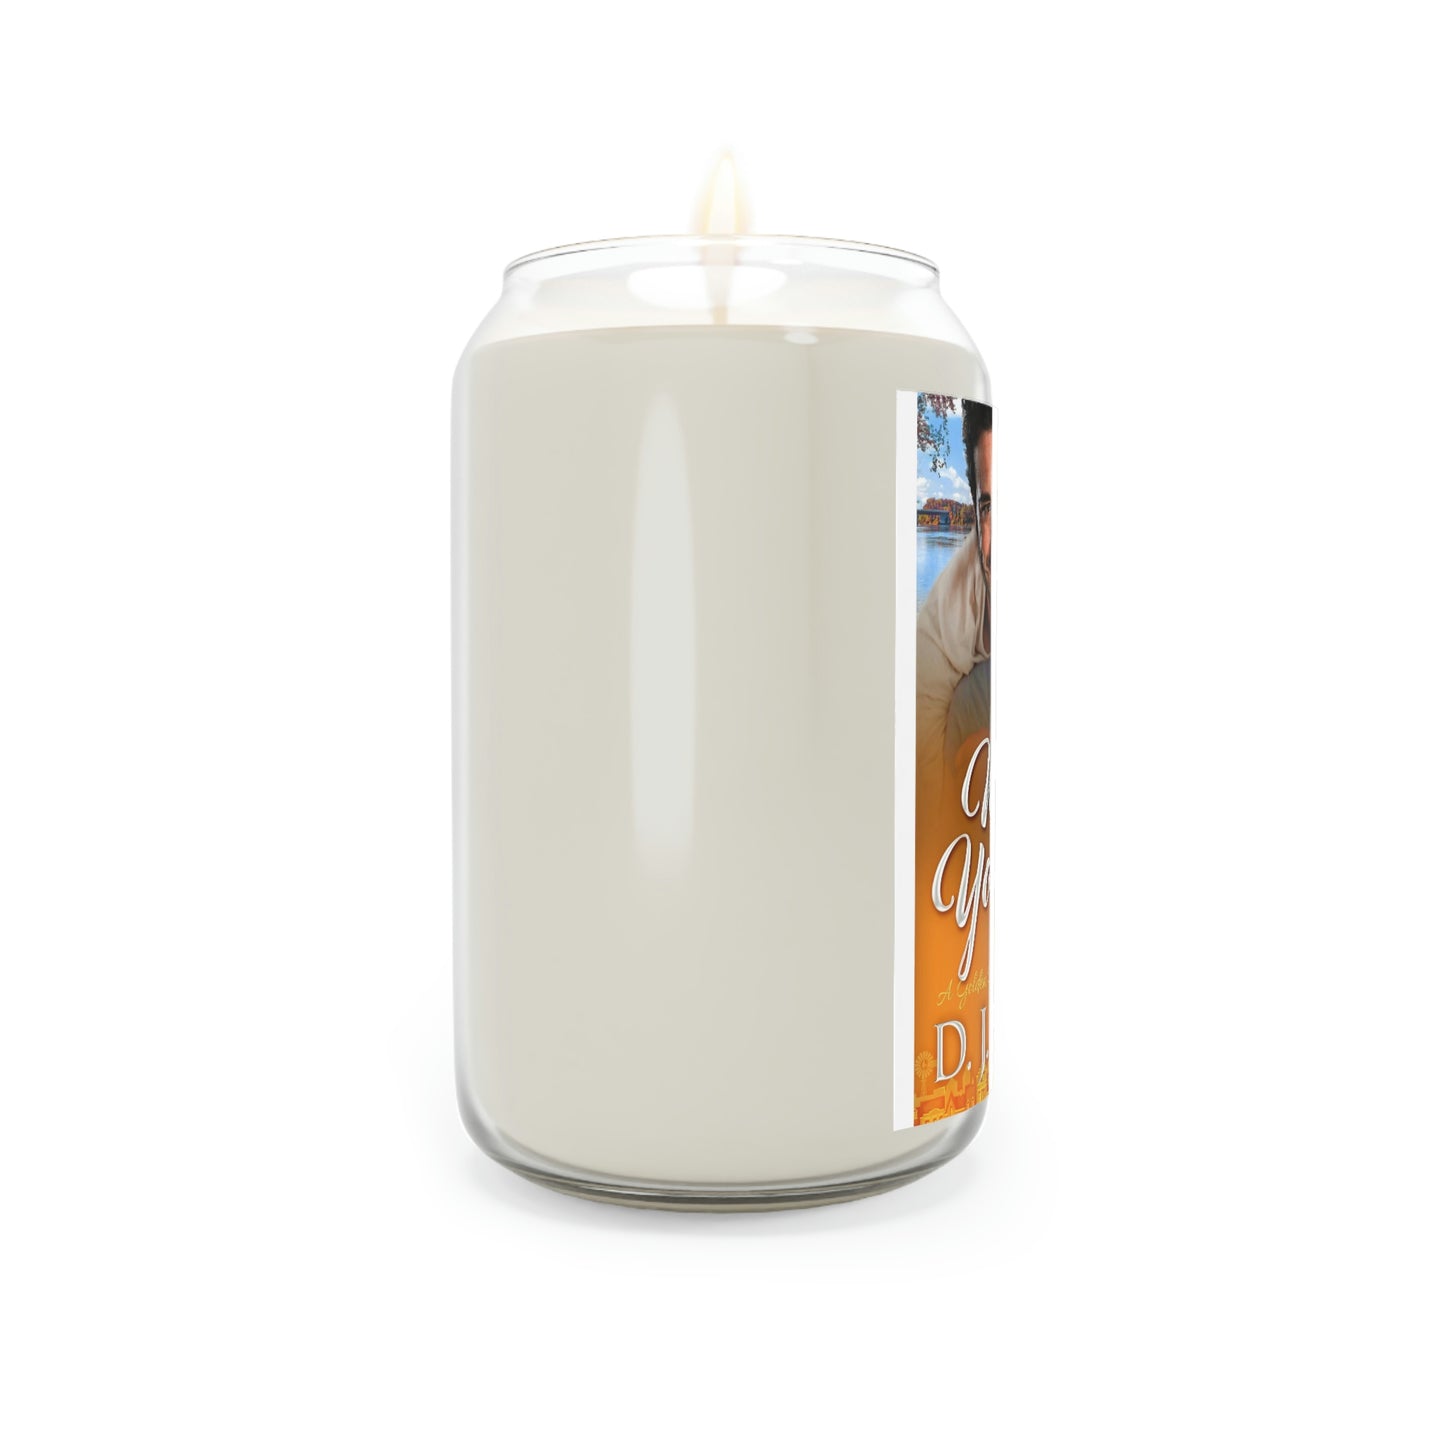 Write By Your Side - Scented Candle